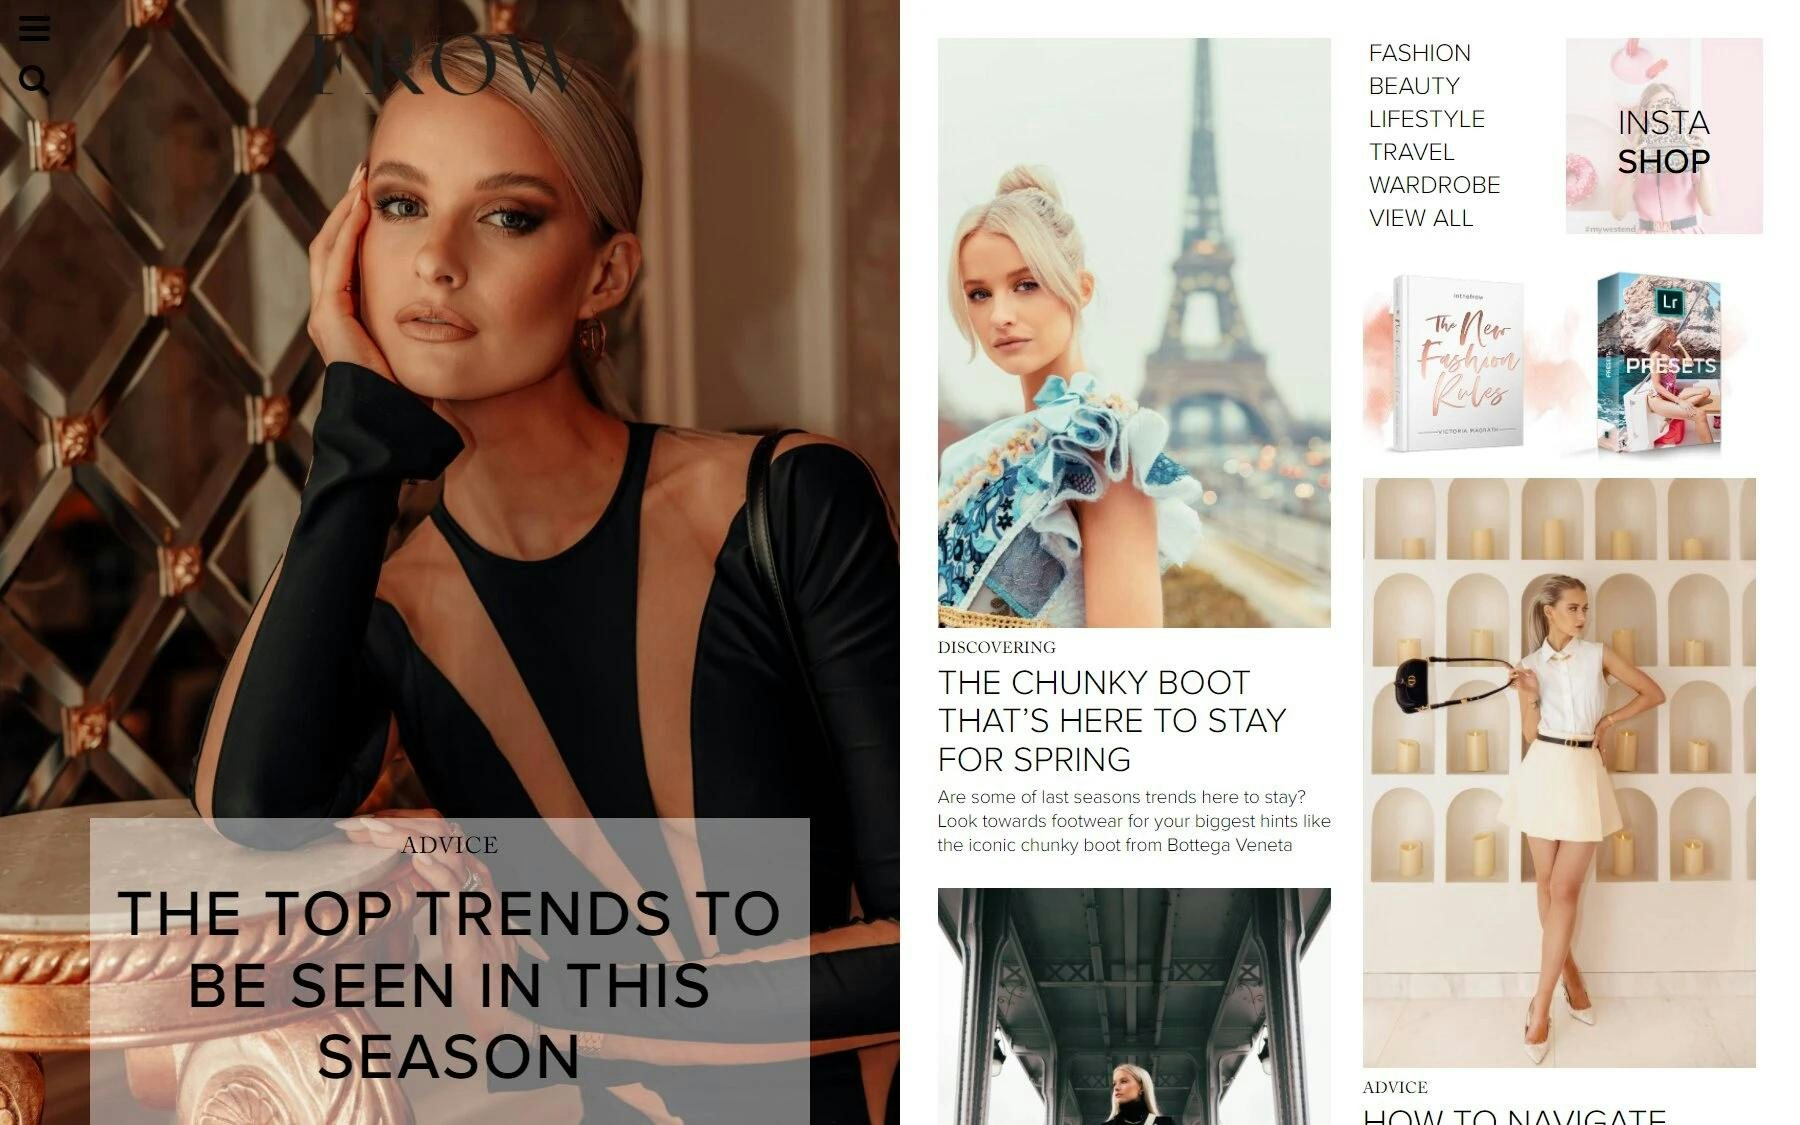 4 Tips for Making Your First Designer Purchase - Inthefrow